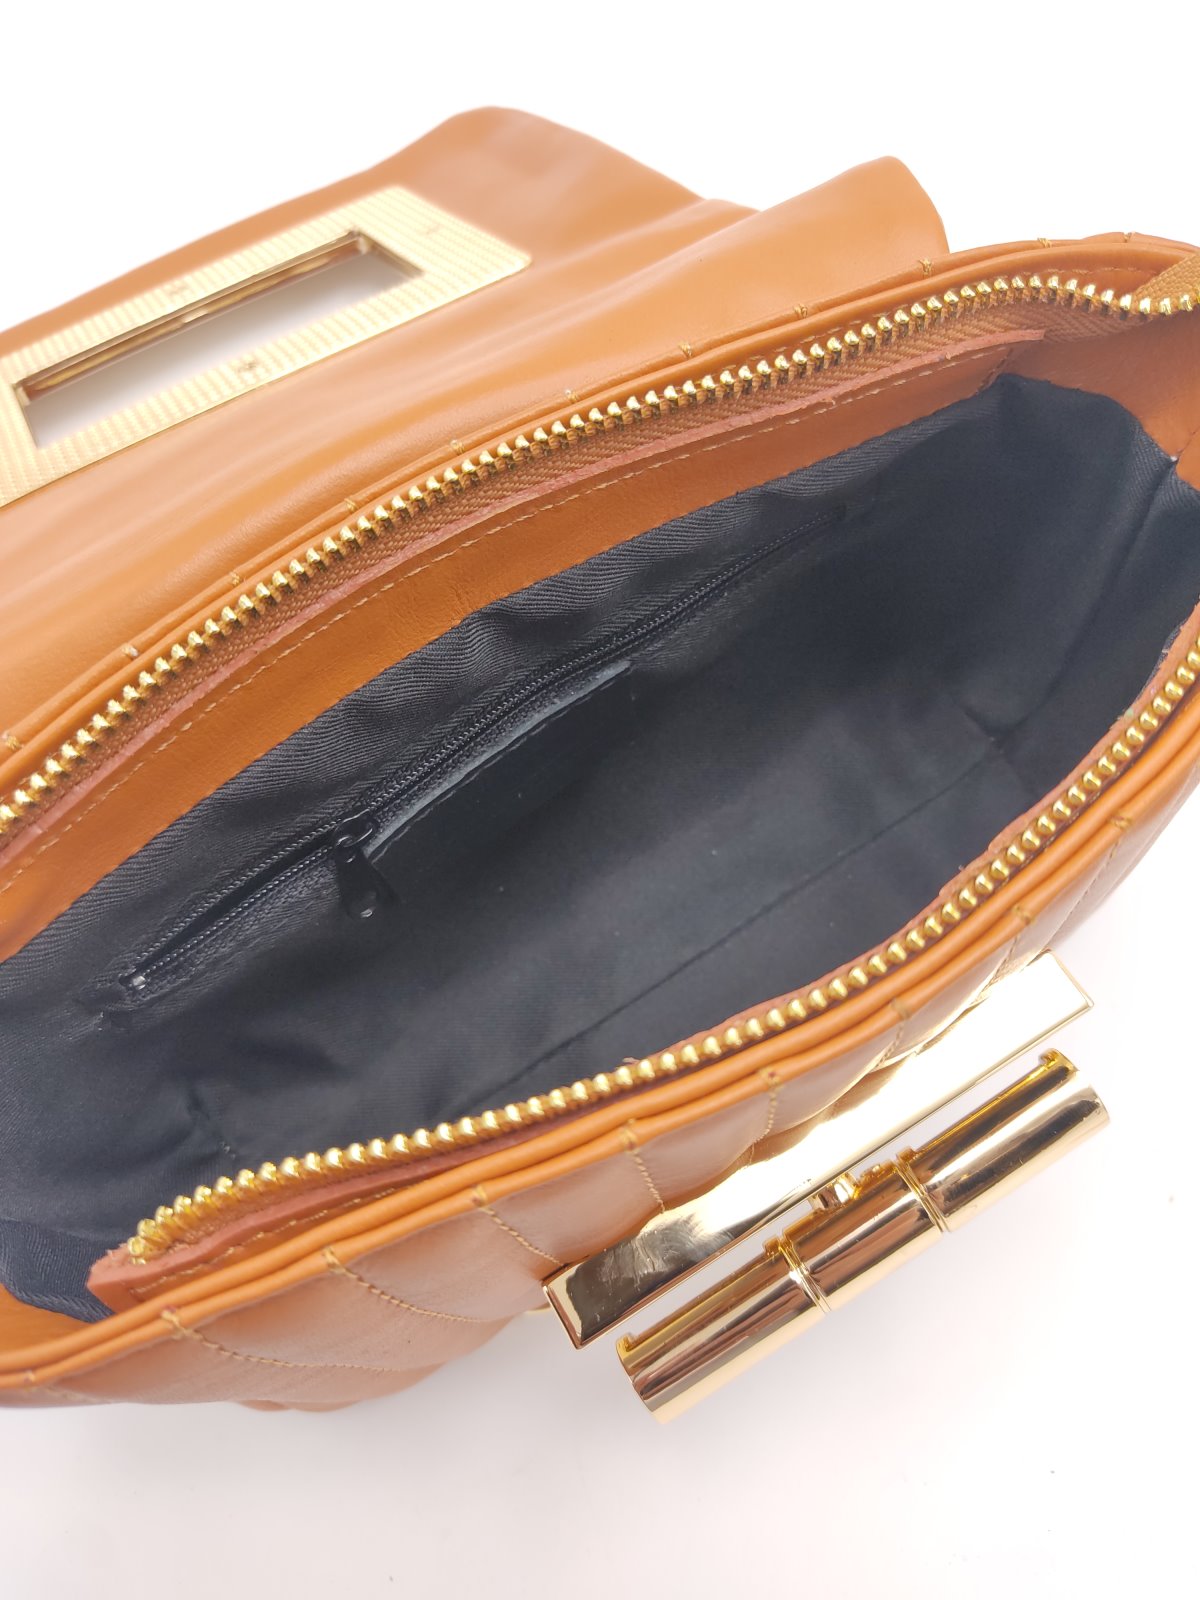 Soft genuine leather shoulder bag for women, made in Italy, art. 112395